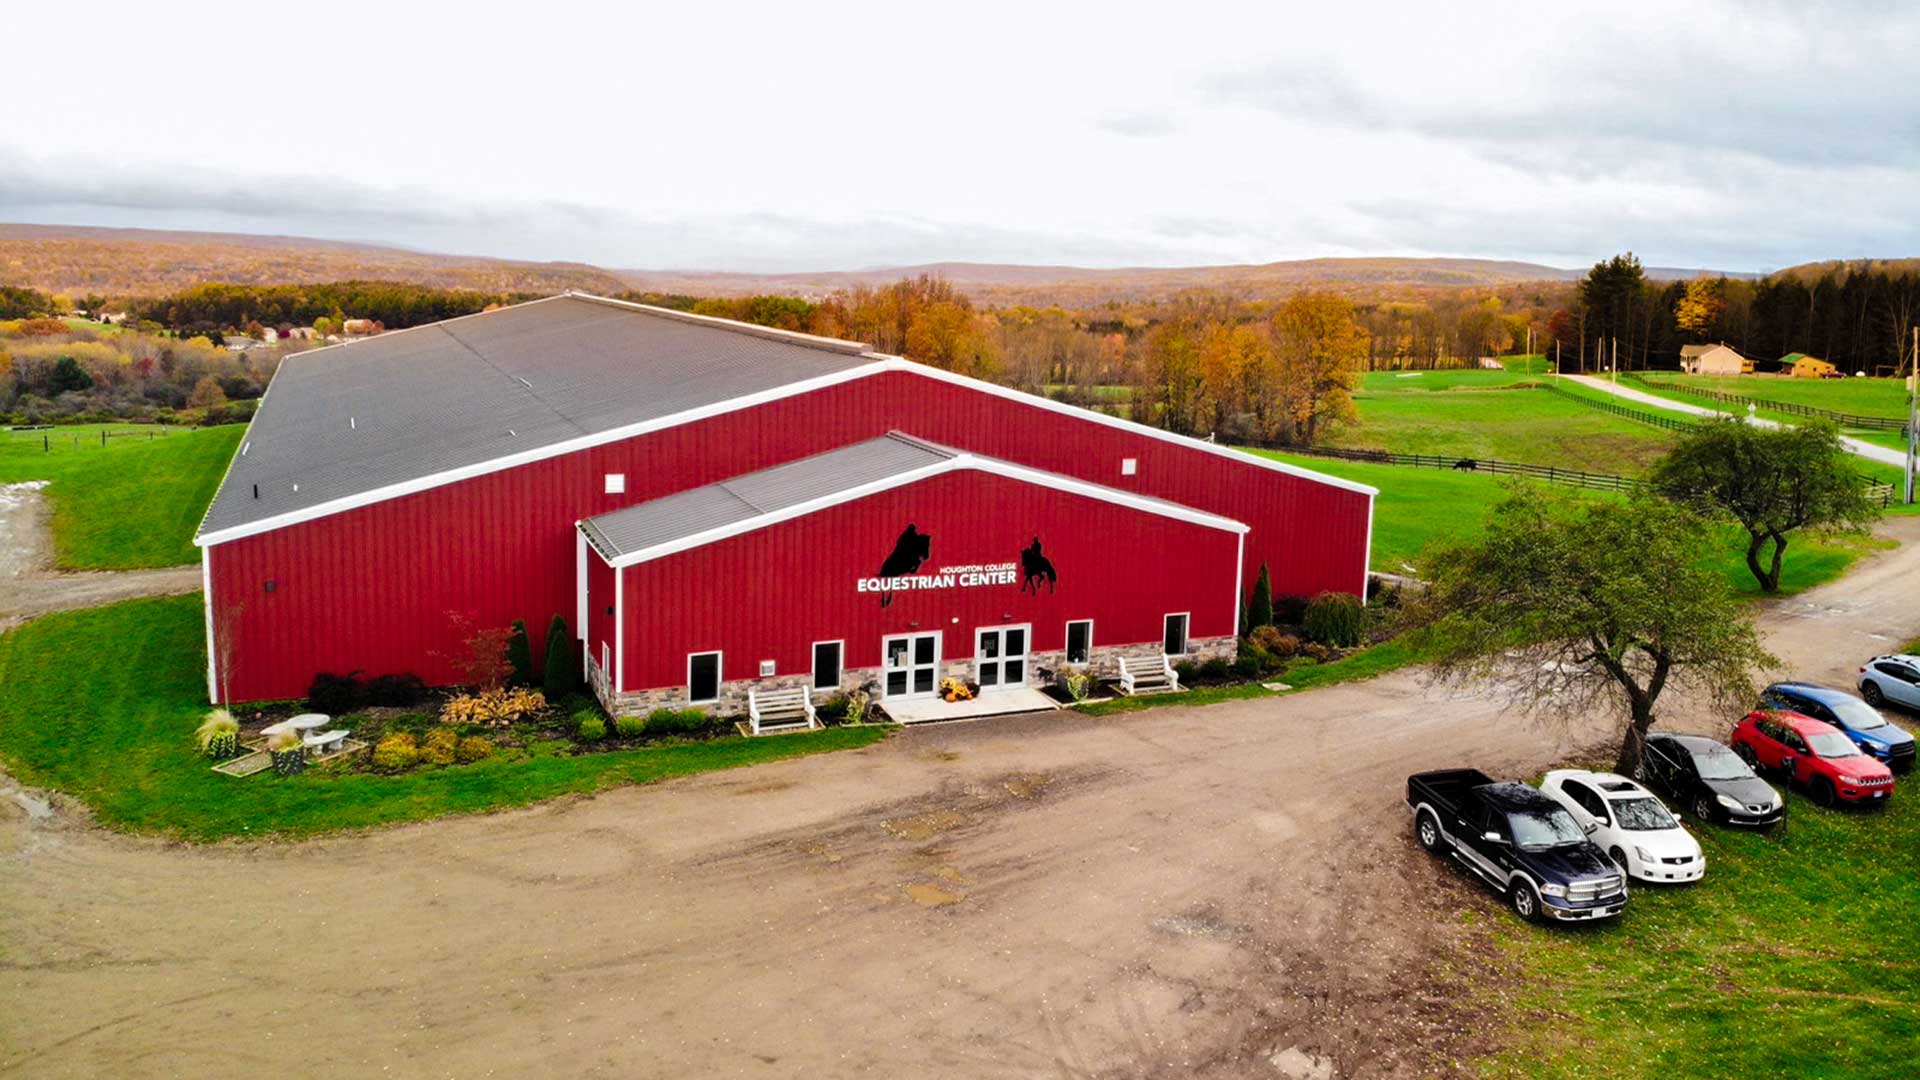 aerial photo of the Equestrian Center in the fall